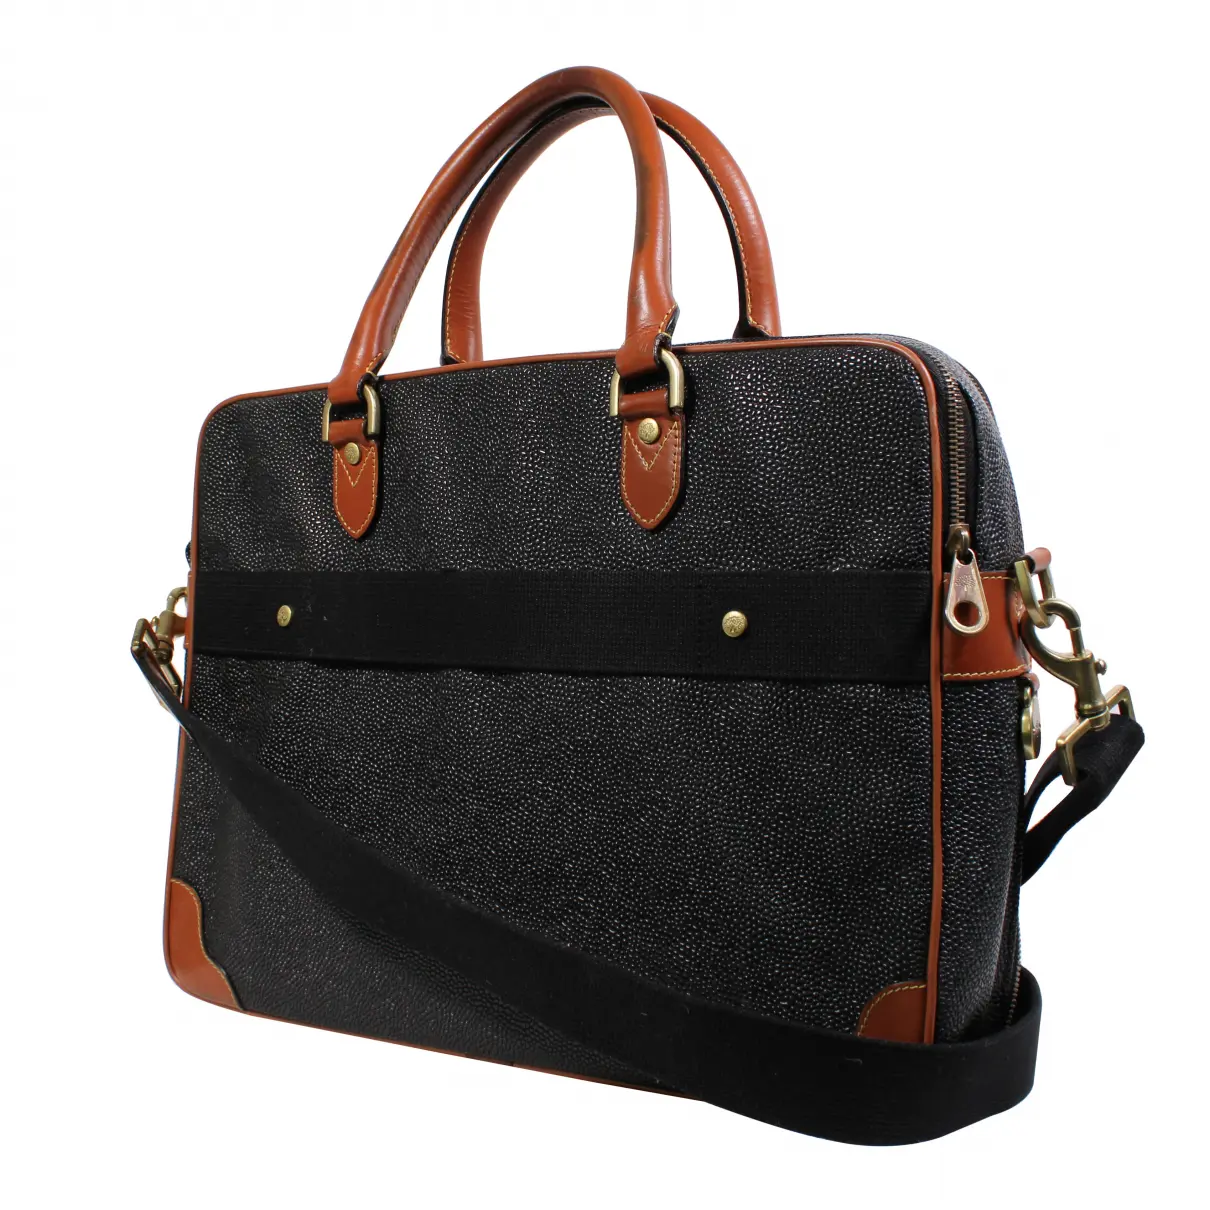 Buy Mulberry Leather bag online